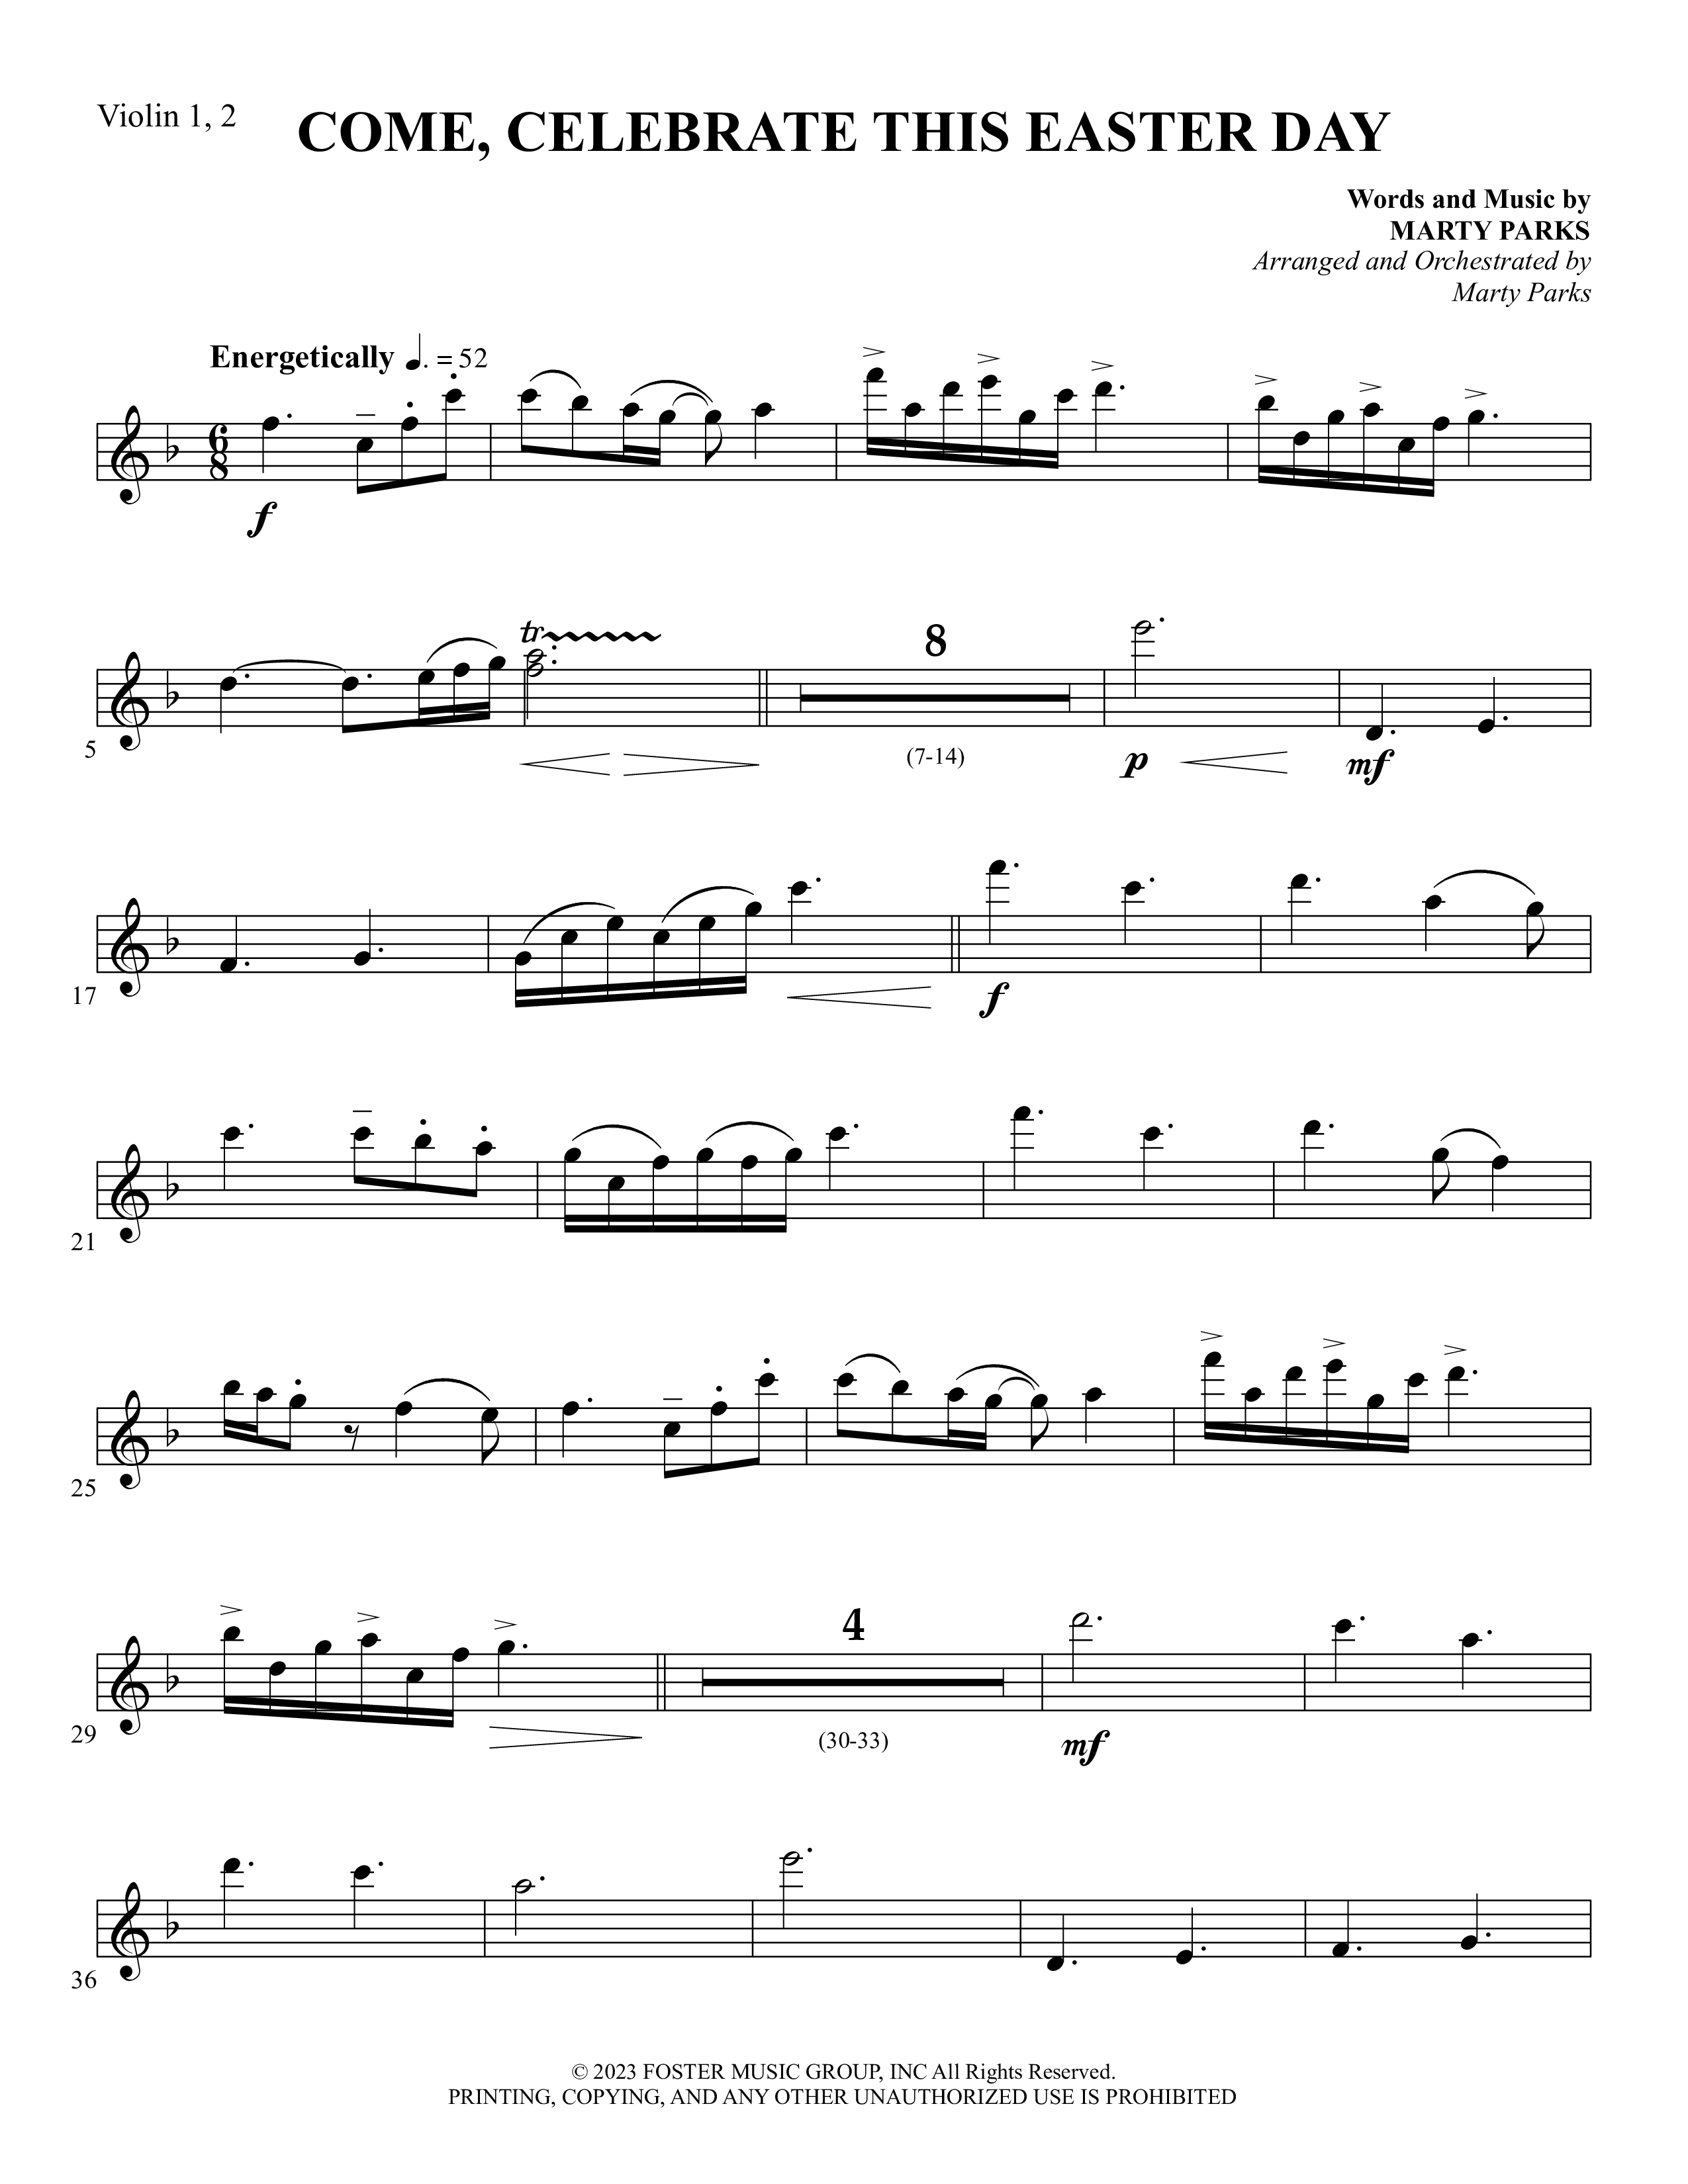 Come Celebrate This Easter Day (Choral Anthem SATB) Violin 1/2 (Foster Music Group / Arr. Marty Parks)